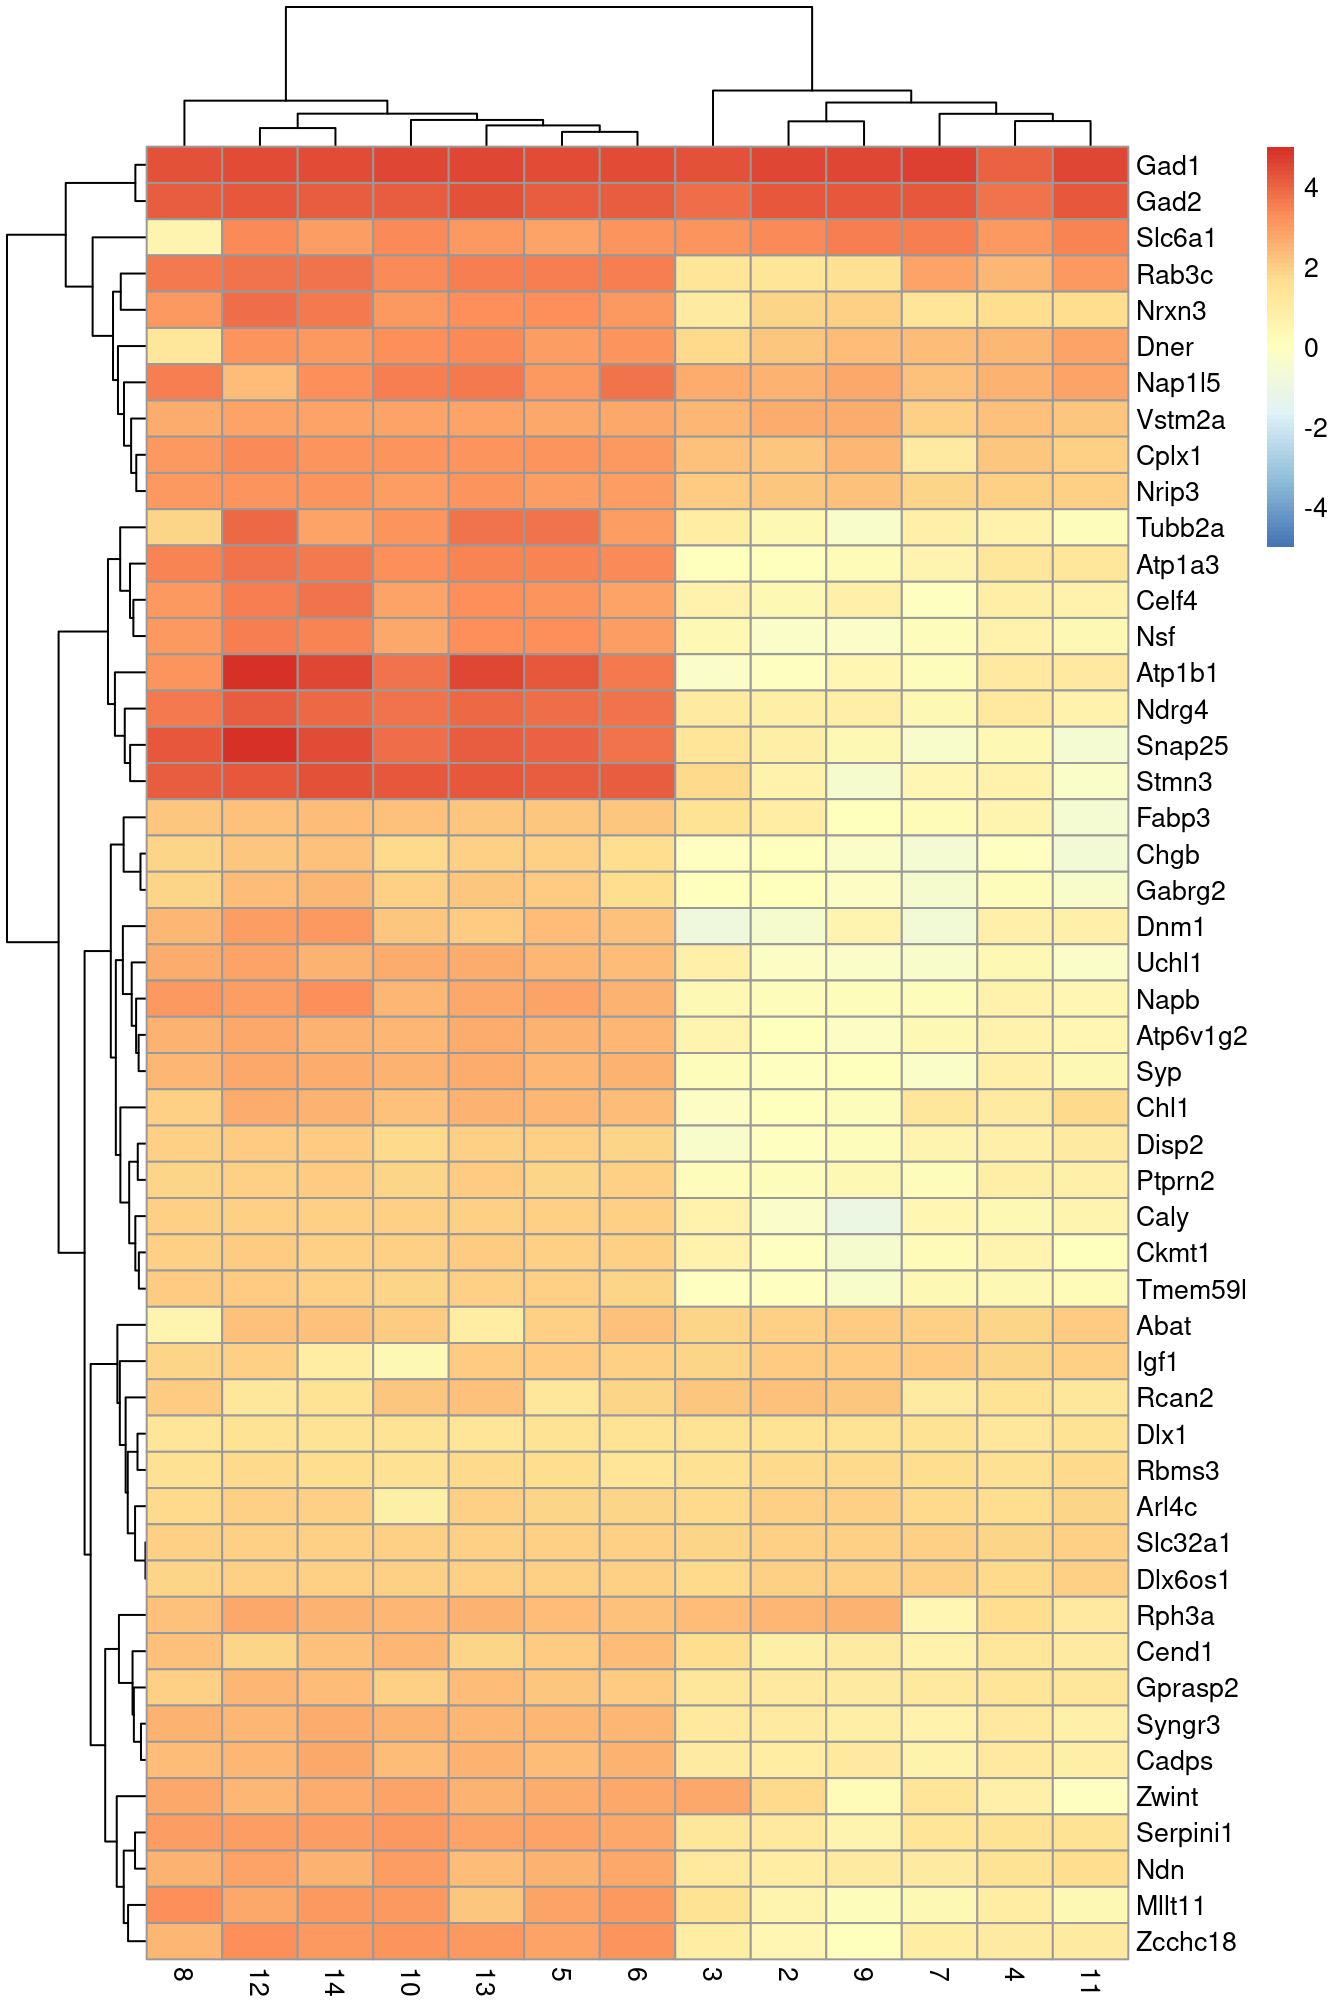 Heatmap of the log-fold changes of the top markers for cluster 1 compared to each other cluster.